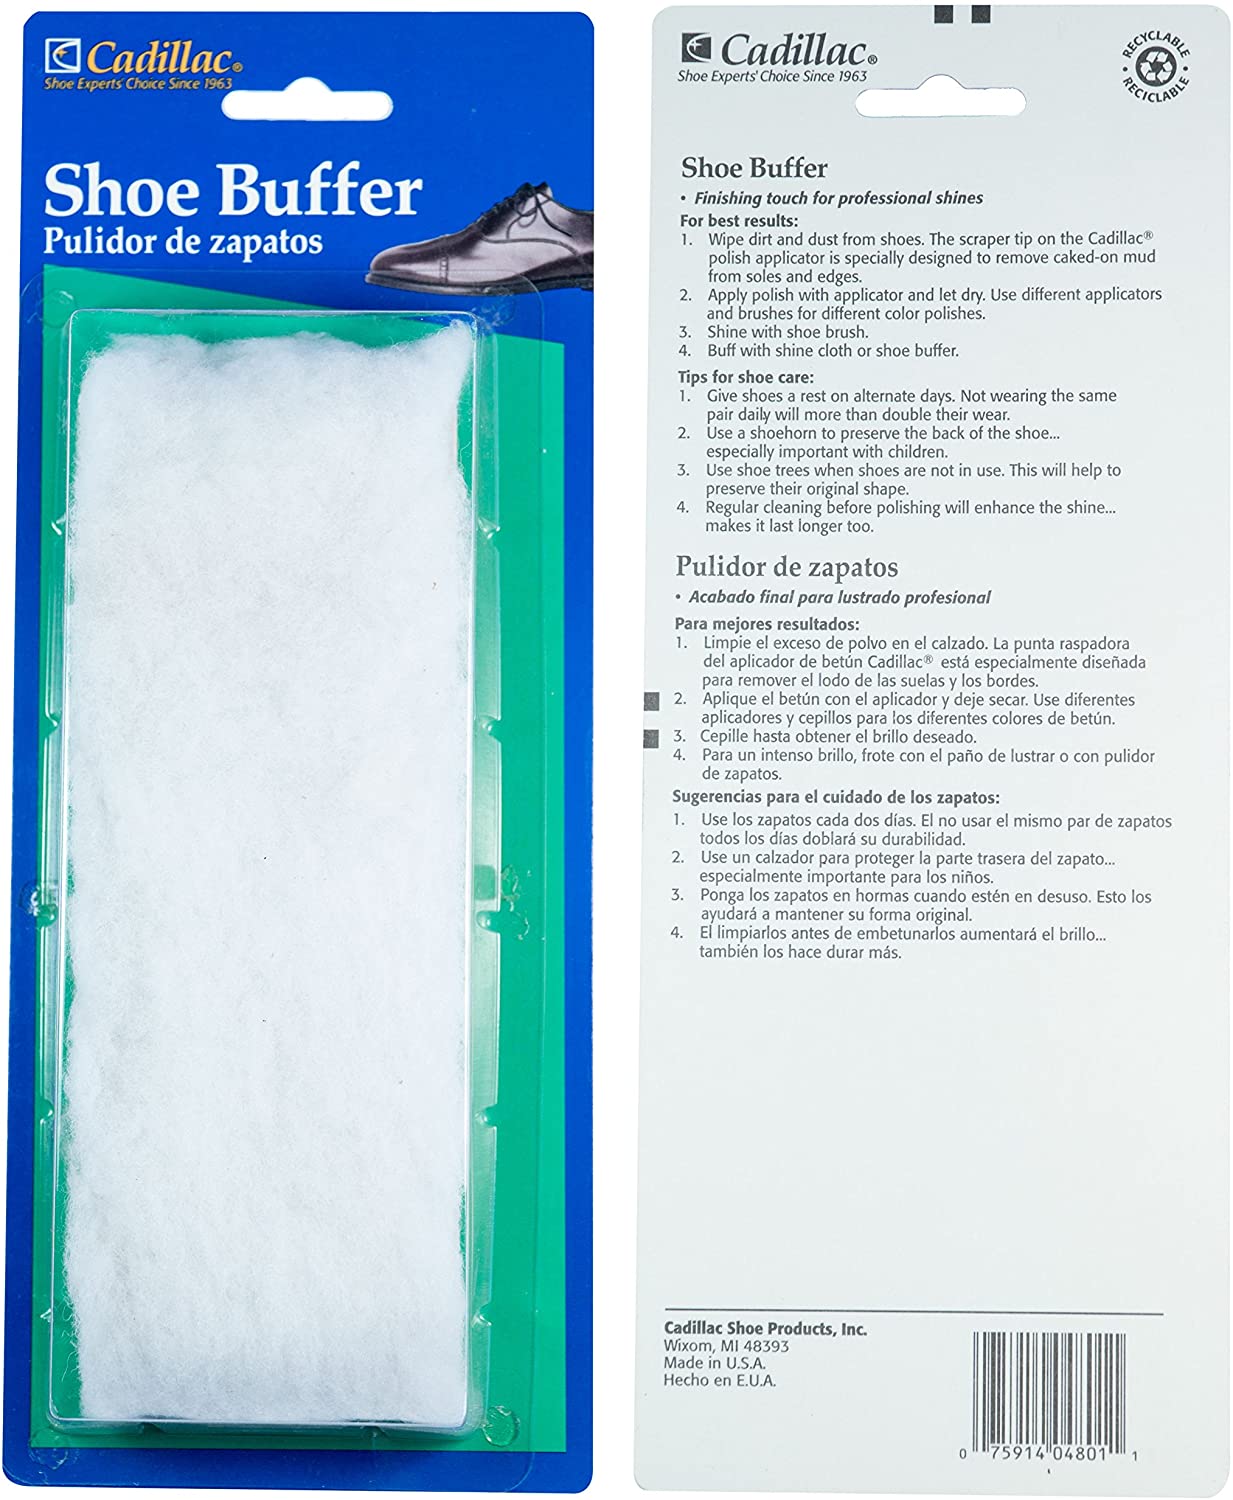 CADILLAC WOOD SHOE BUFFER BLISTER PACK